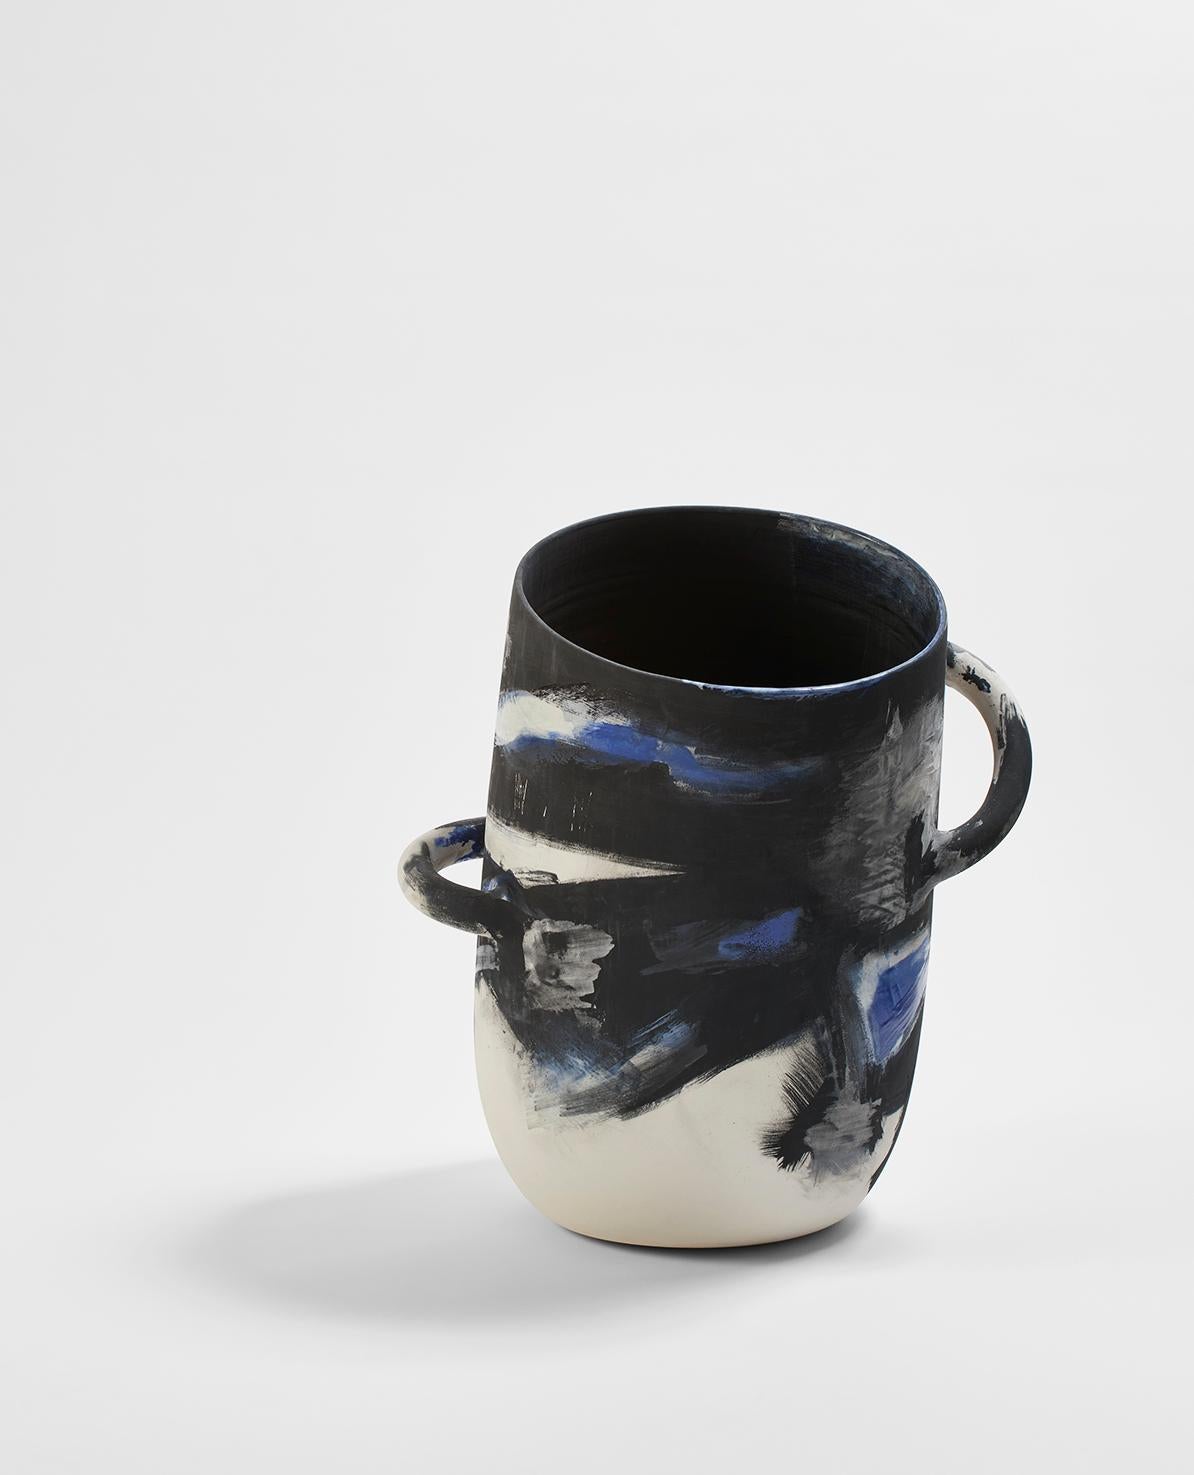 Orage ceramics are one off pieces, designed by the French artist Benjamin Poulanges who is represented by Galerie Negropontes. 

Multi-faceted artist Benjamin Poulanges offers a distinctive vision. His experience is far-ranging, his mind open to